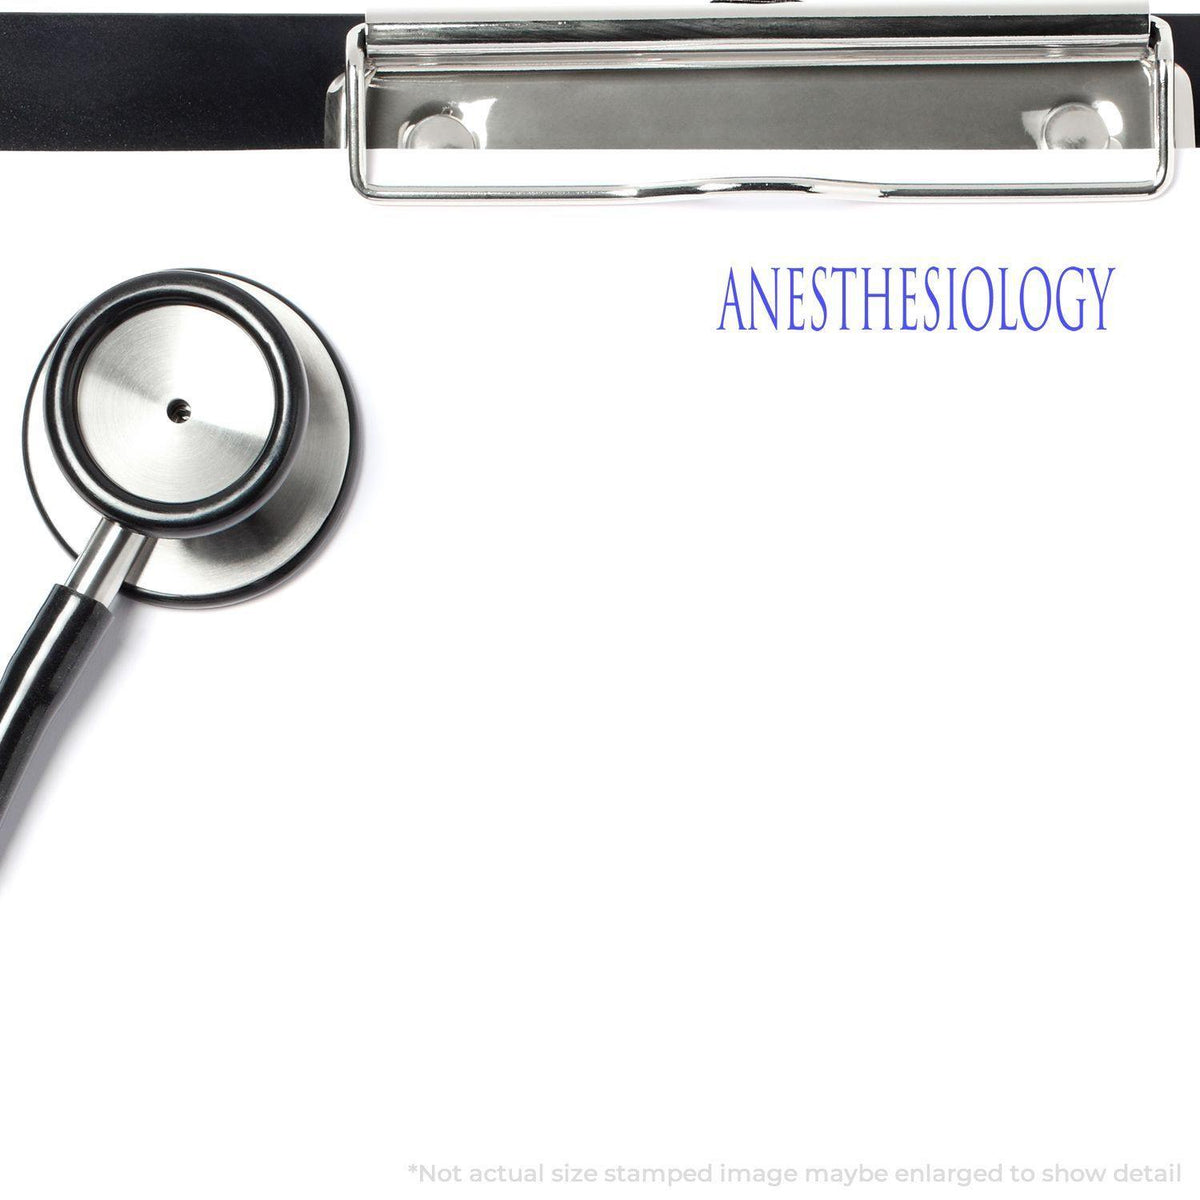 Anesthesiology Rubber Stamp Lifestyle Photo